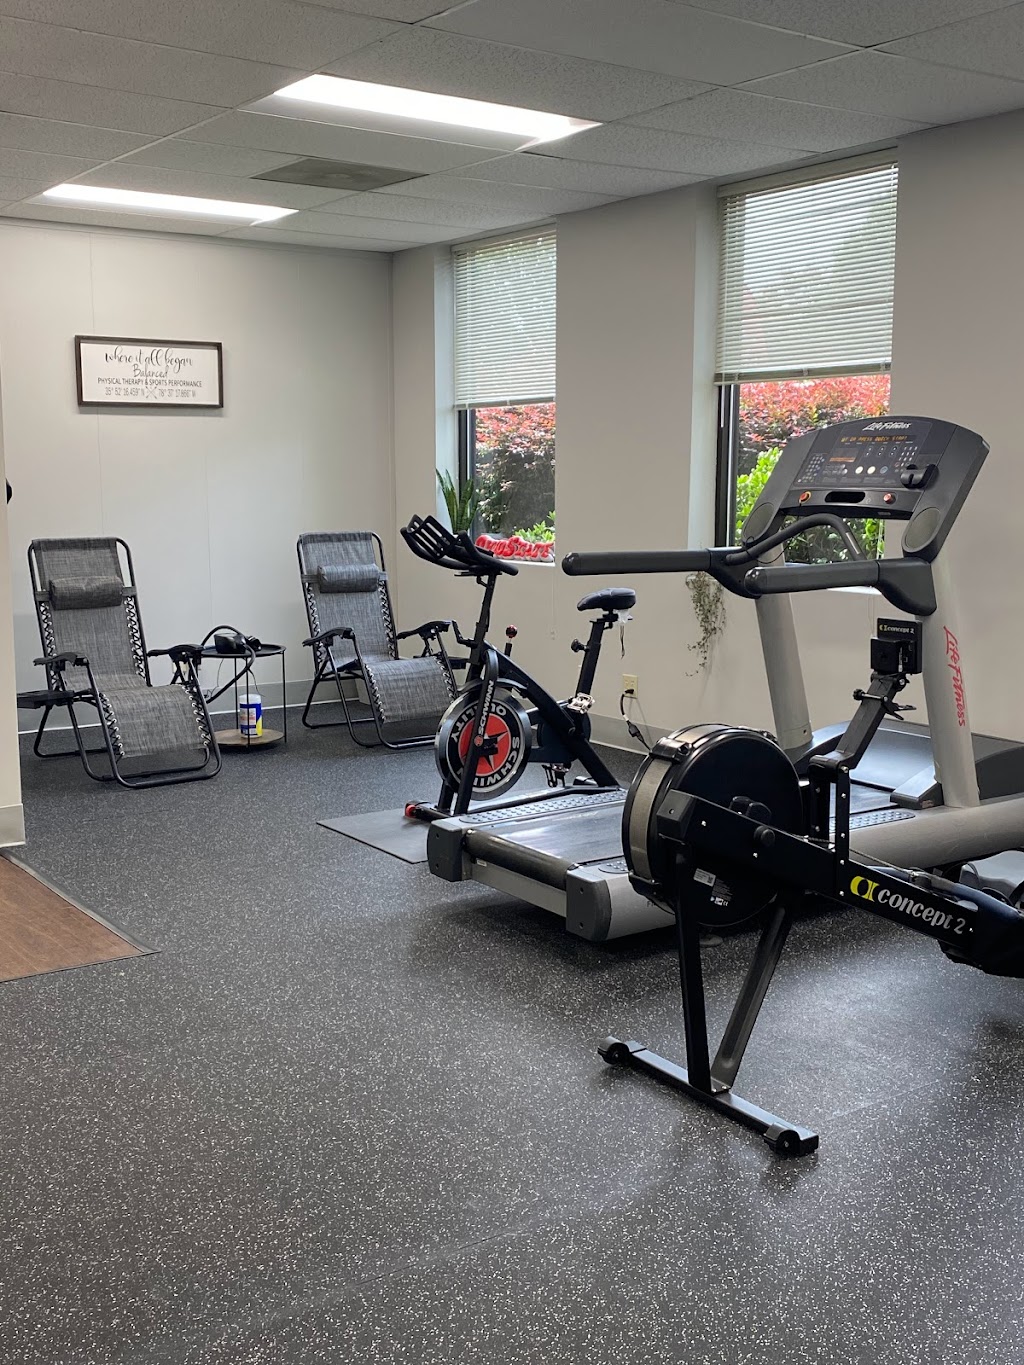 Balanced Physical Therapy & Sports Performance | 6504 Falls of Neuse Rd #100, Raleigh, NC 27615, USA | Phone: (919) 600-0987